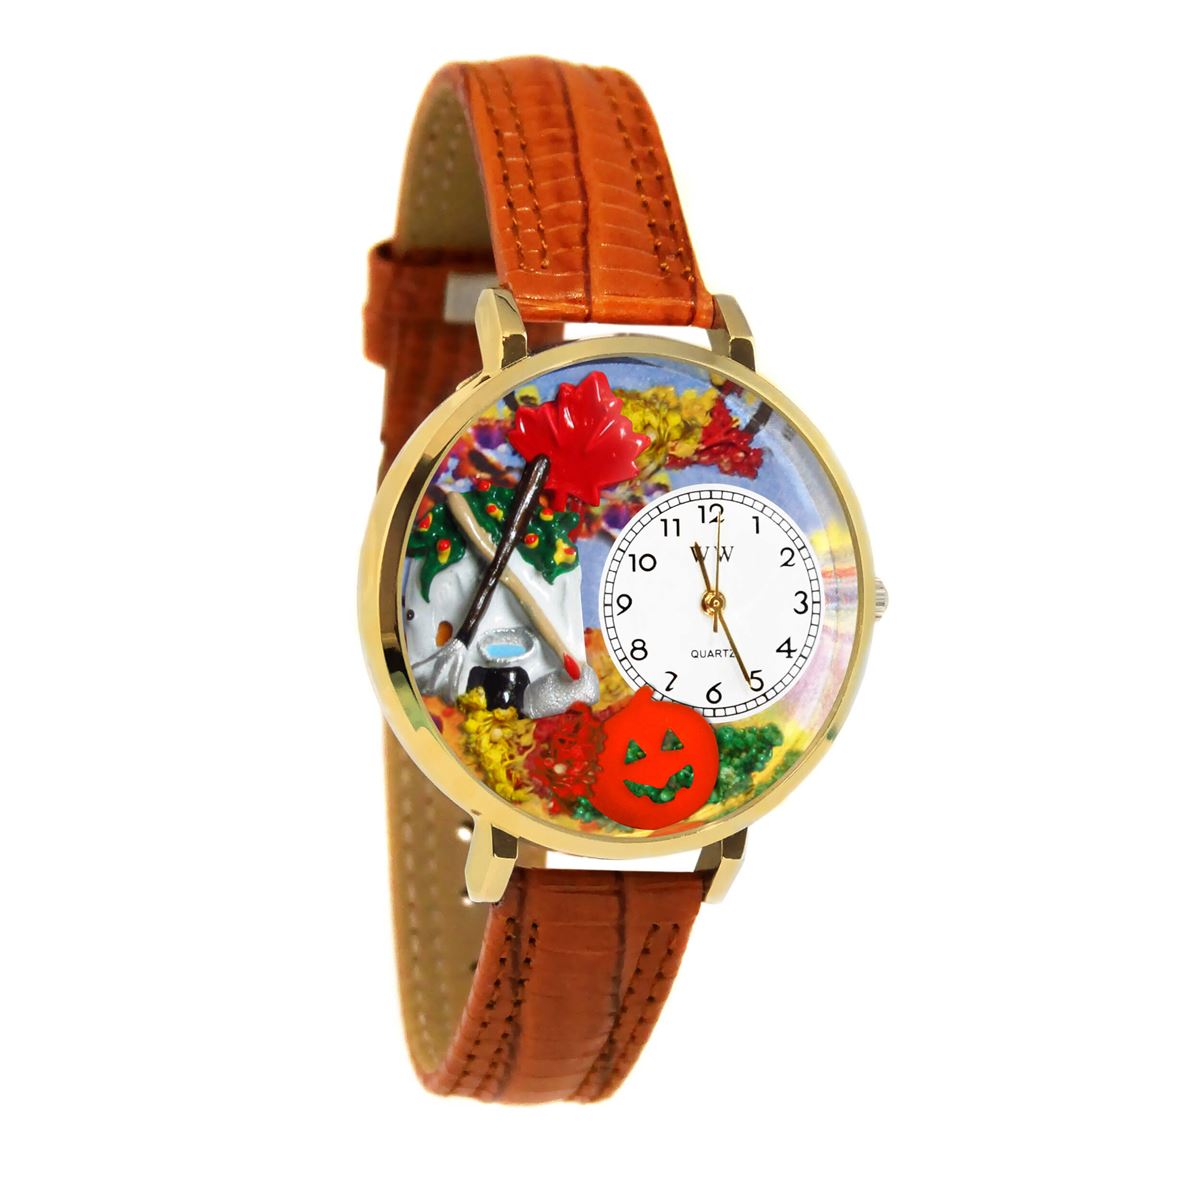 Whimsical Gifts | Autumn Leaves 3D Watch Large Style | Handmade in USA | Holiday & Seasonal Themed | Fall & Winter | Novelty Unique Fun Miniatures Gift | Gold Finish Tan Leather Watch Band